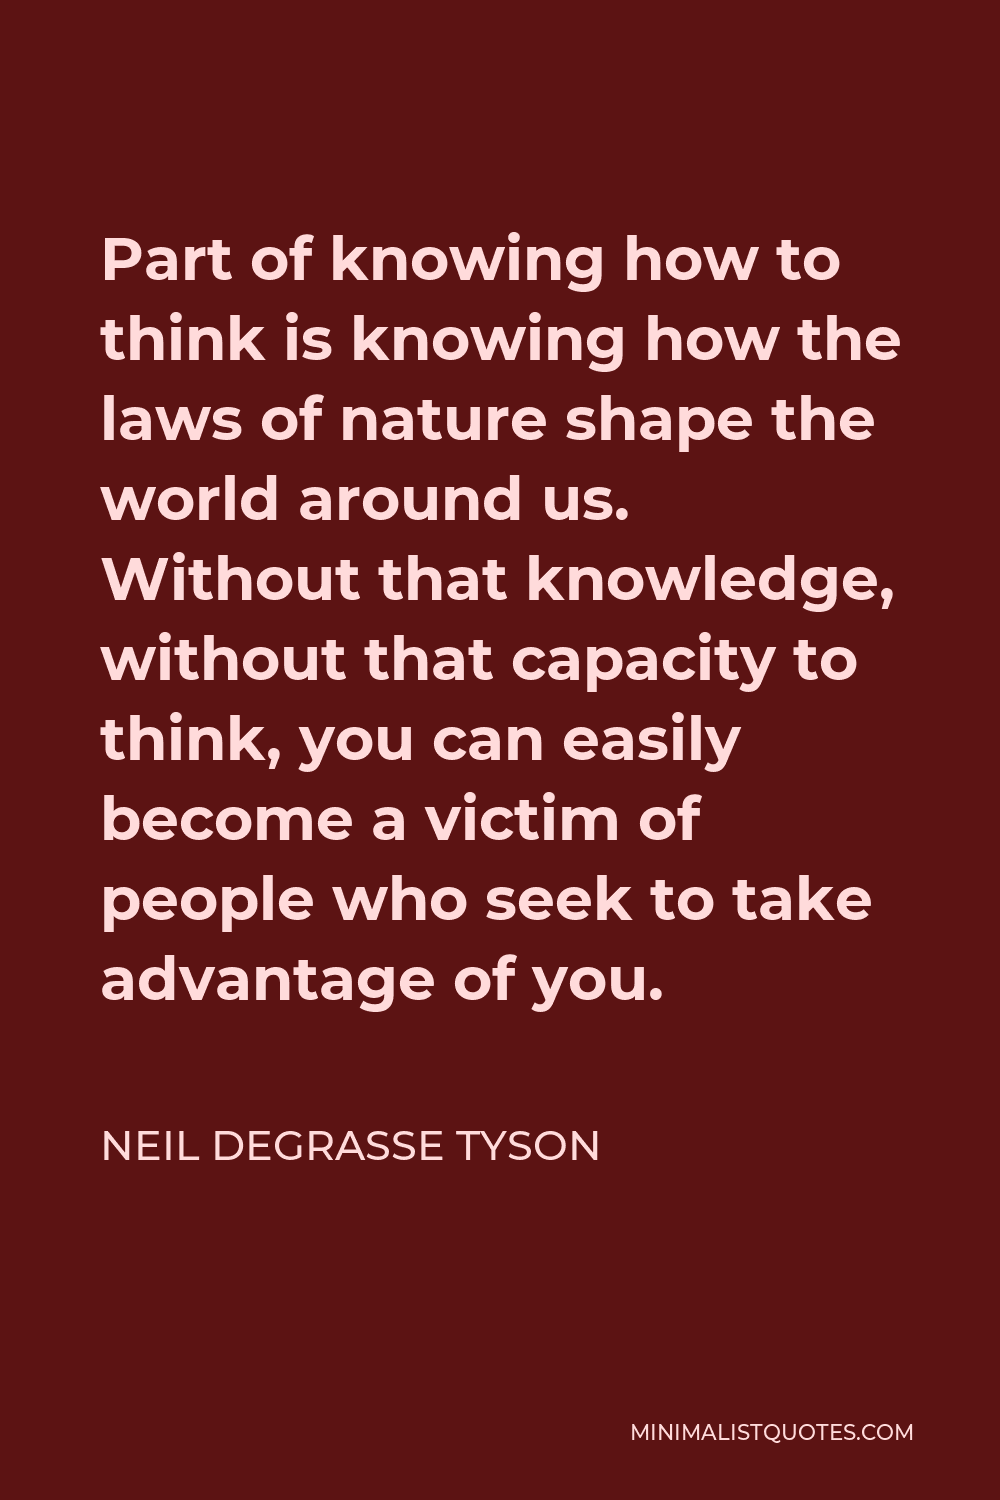 Neil deGrasse Tyson Quote - Part of knowing how to think is knowing how the laws of nature shape the world around us. Without that knowledge, without that capacity to think, you can easily become a victim of people who seek to take advantage of you.